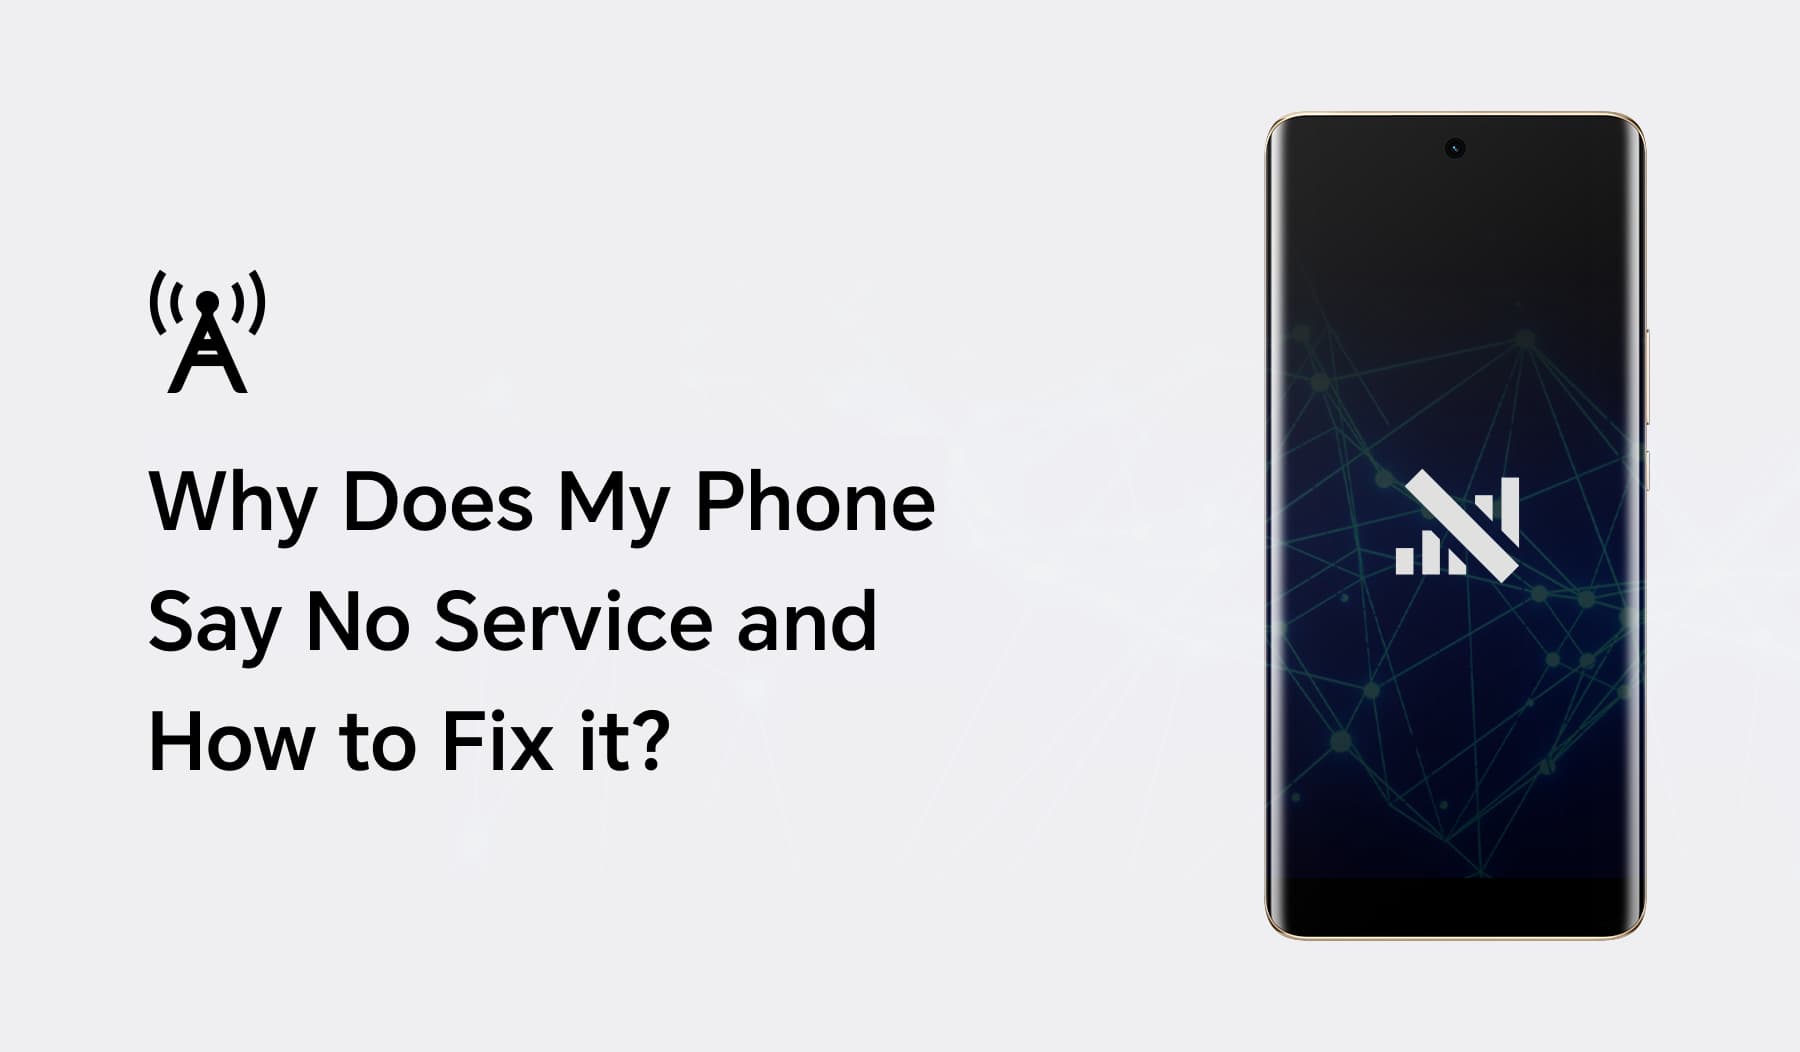 Why Does My Phone Say No Service and How to Fix it?